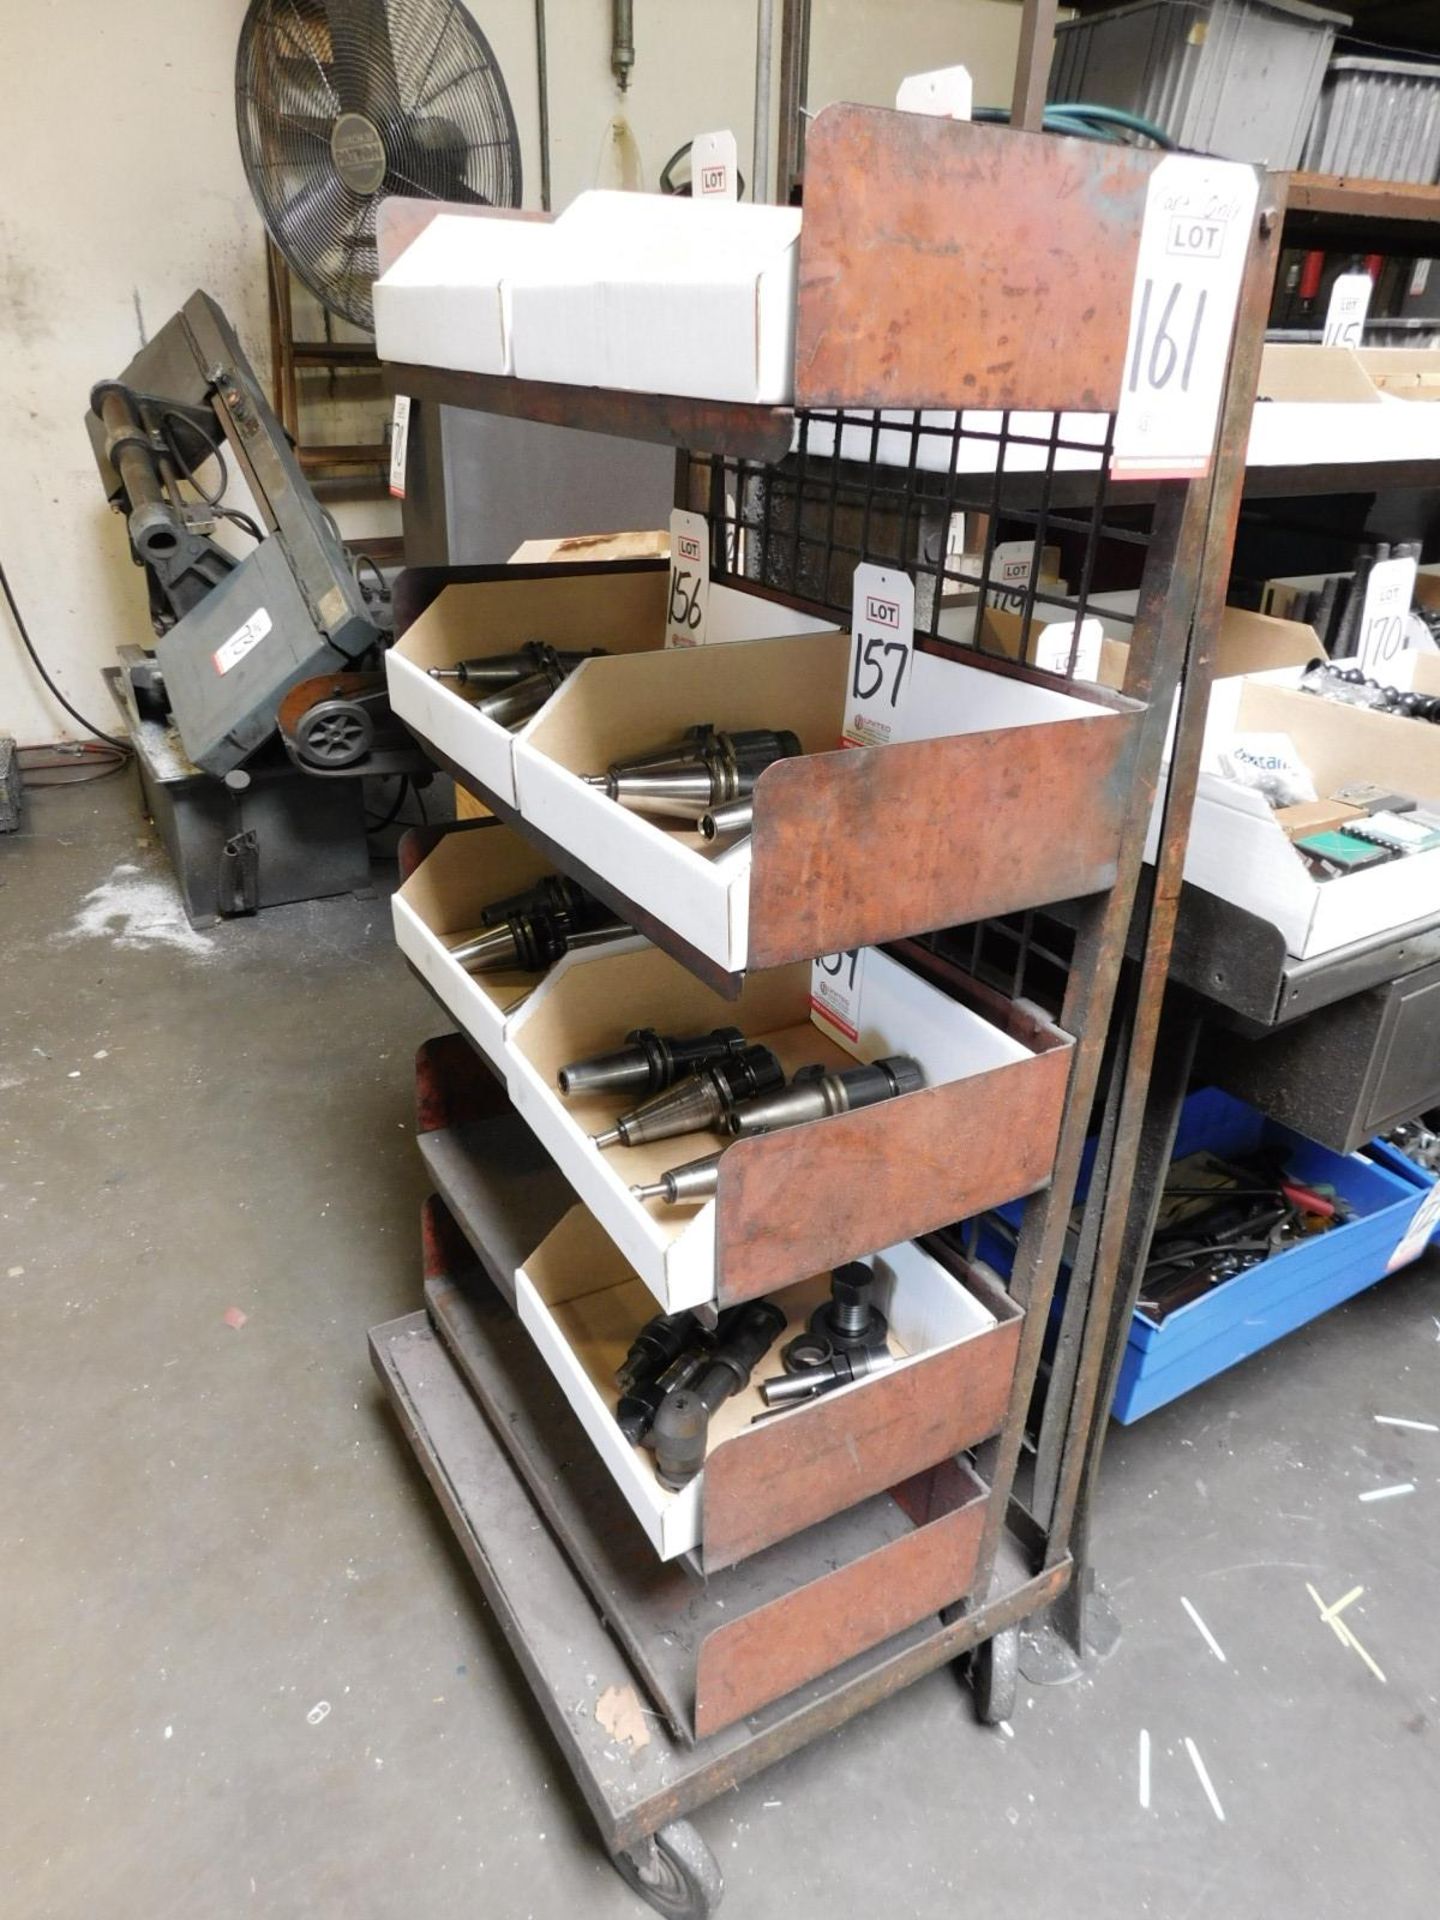 SHOP CART W/ (5) REMOVABLE STEEL BINS, CONTENTS NOT INCLUDED